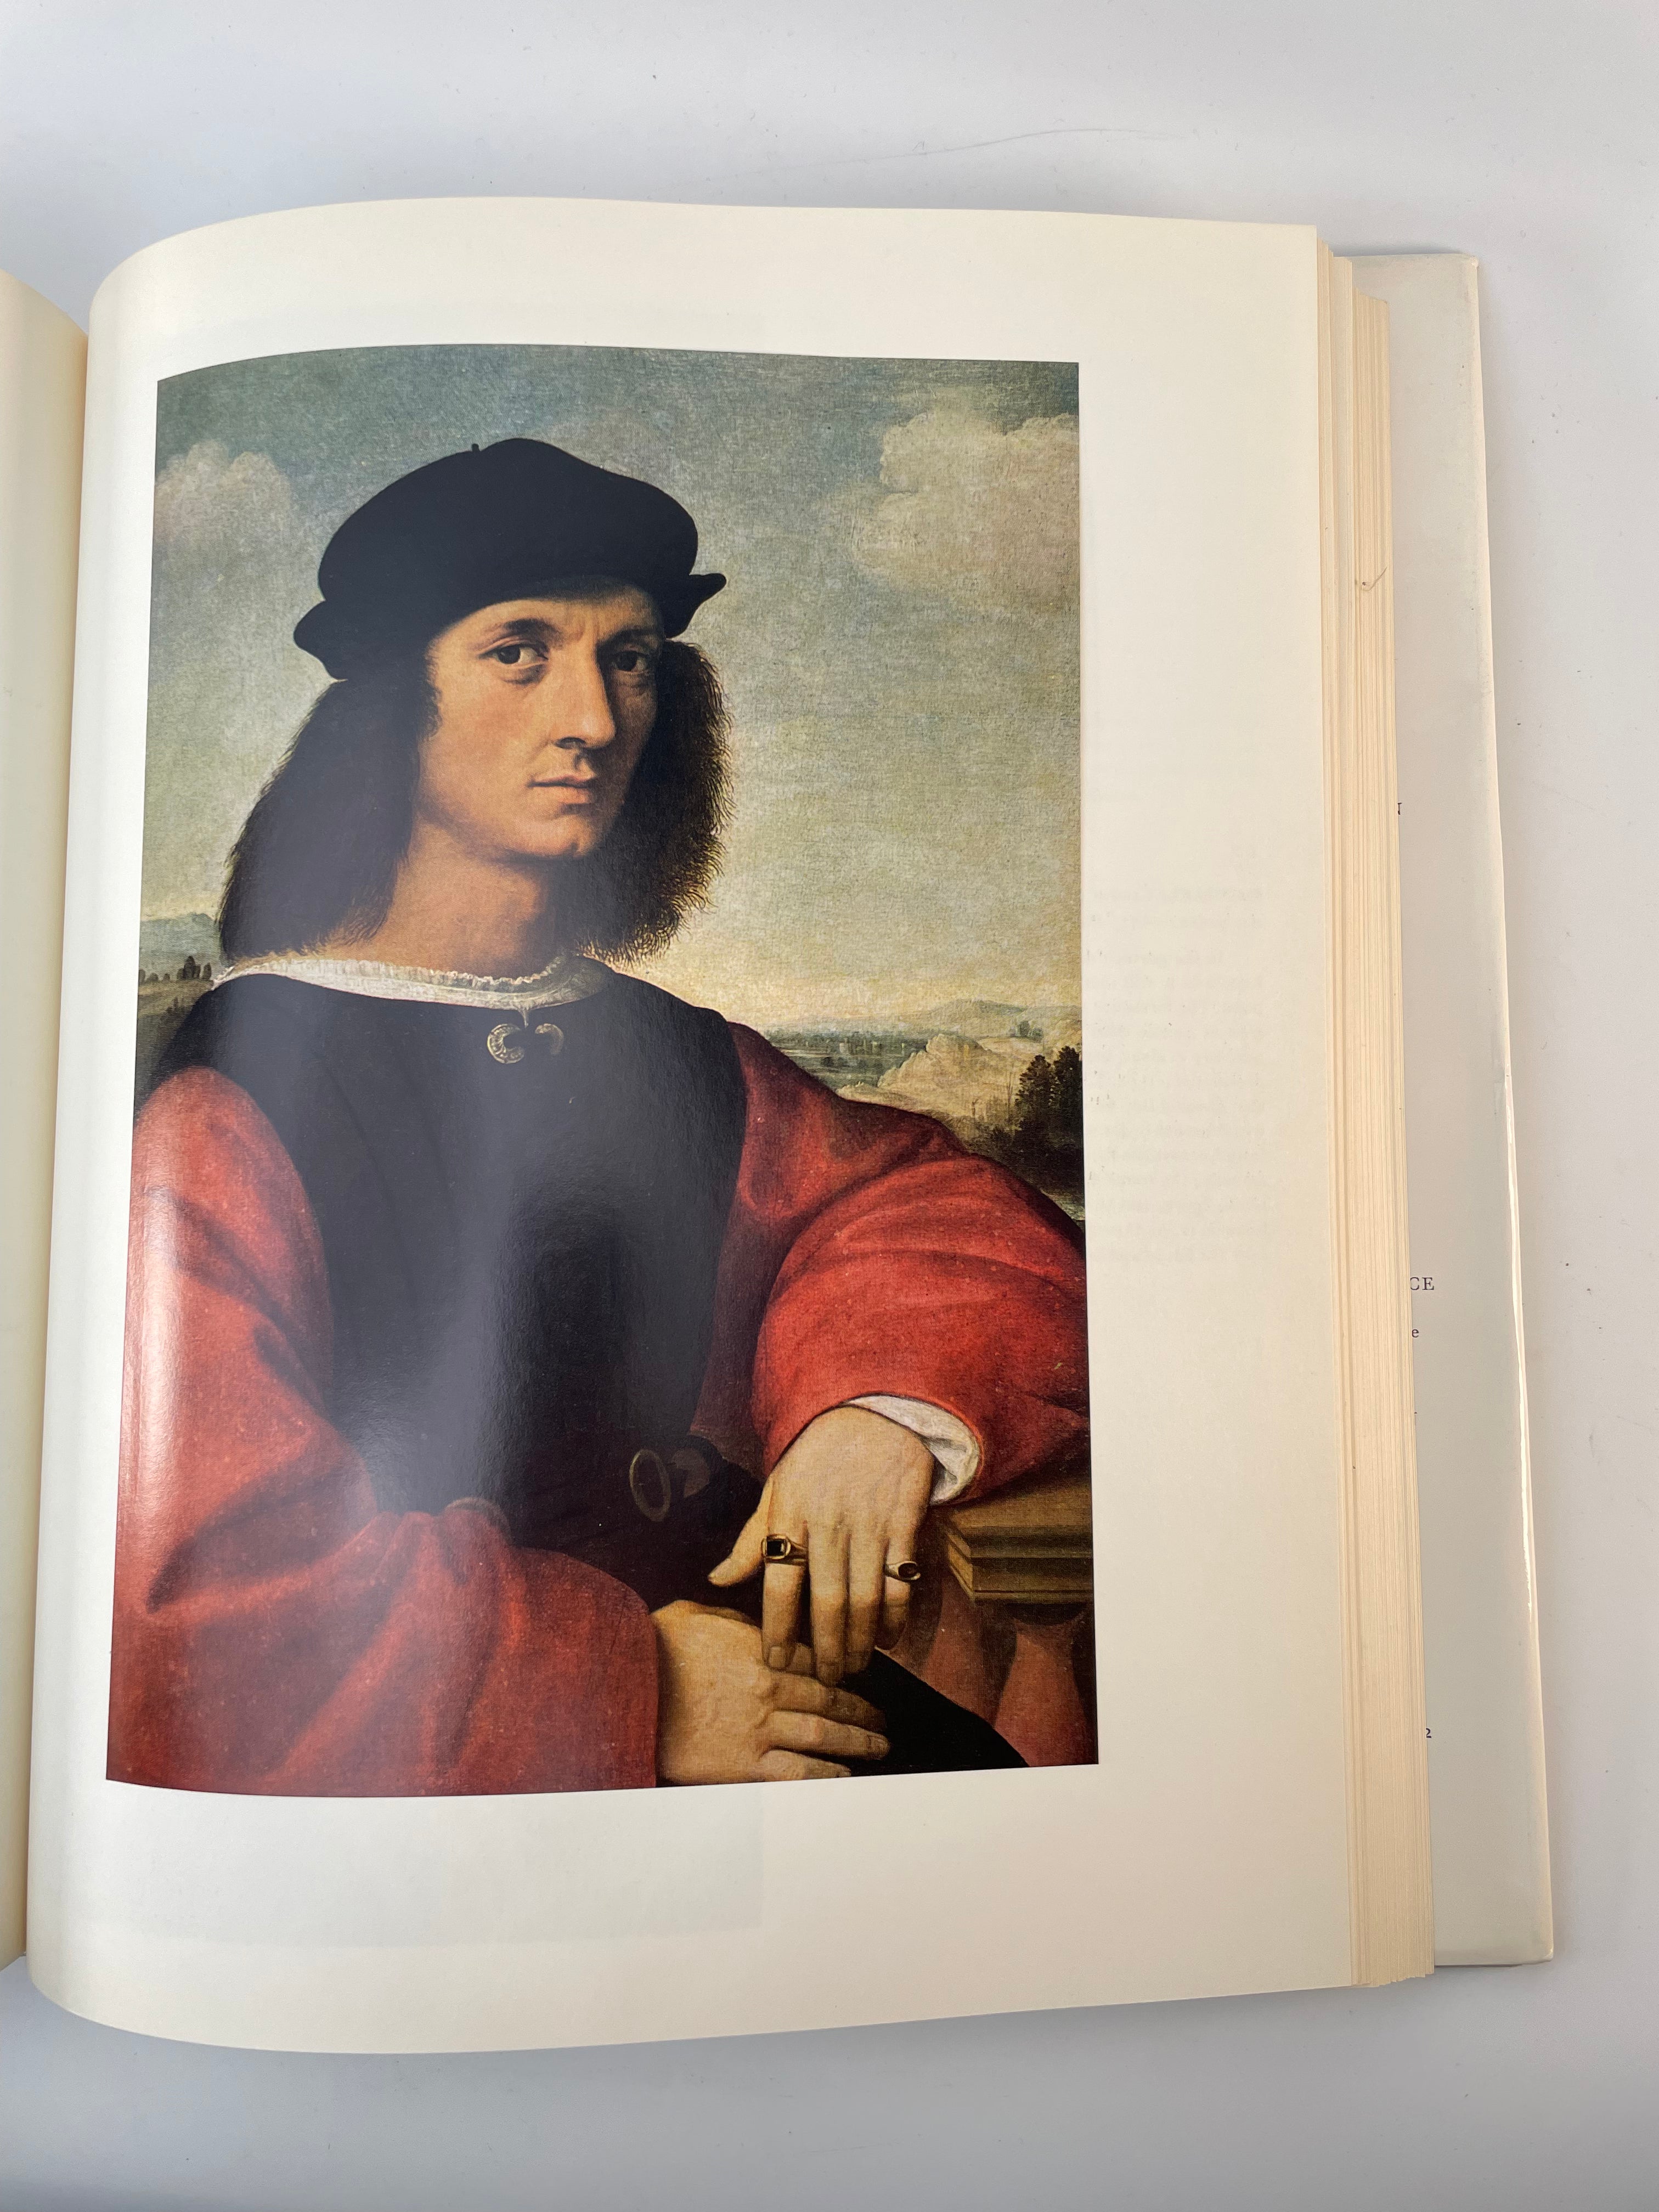 "Art Treasures of the Uffizi and Pitti Florence" by Filippo Rossi